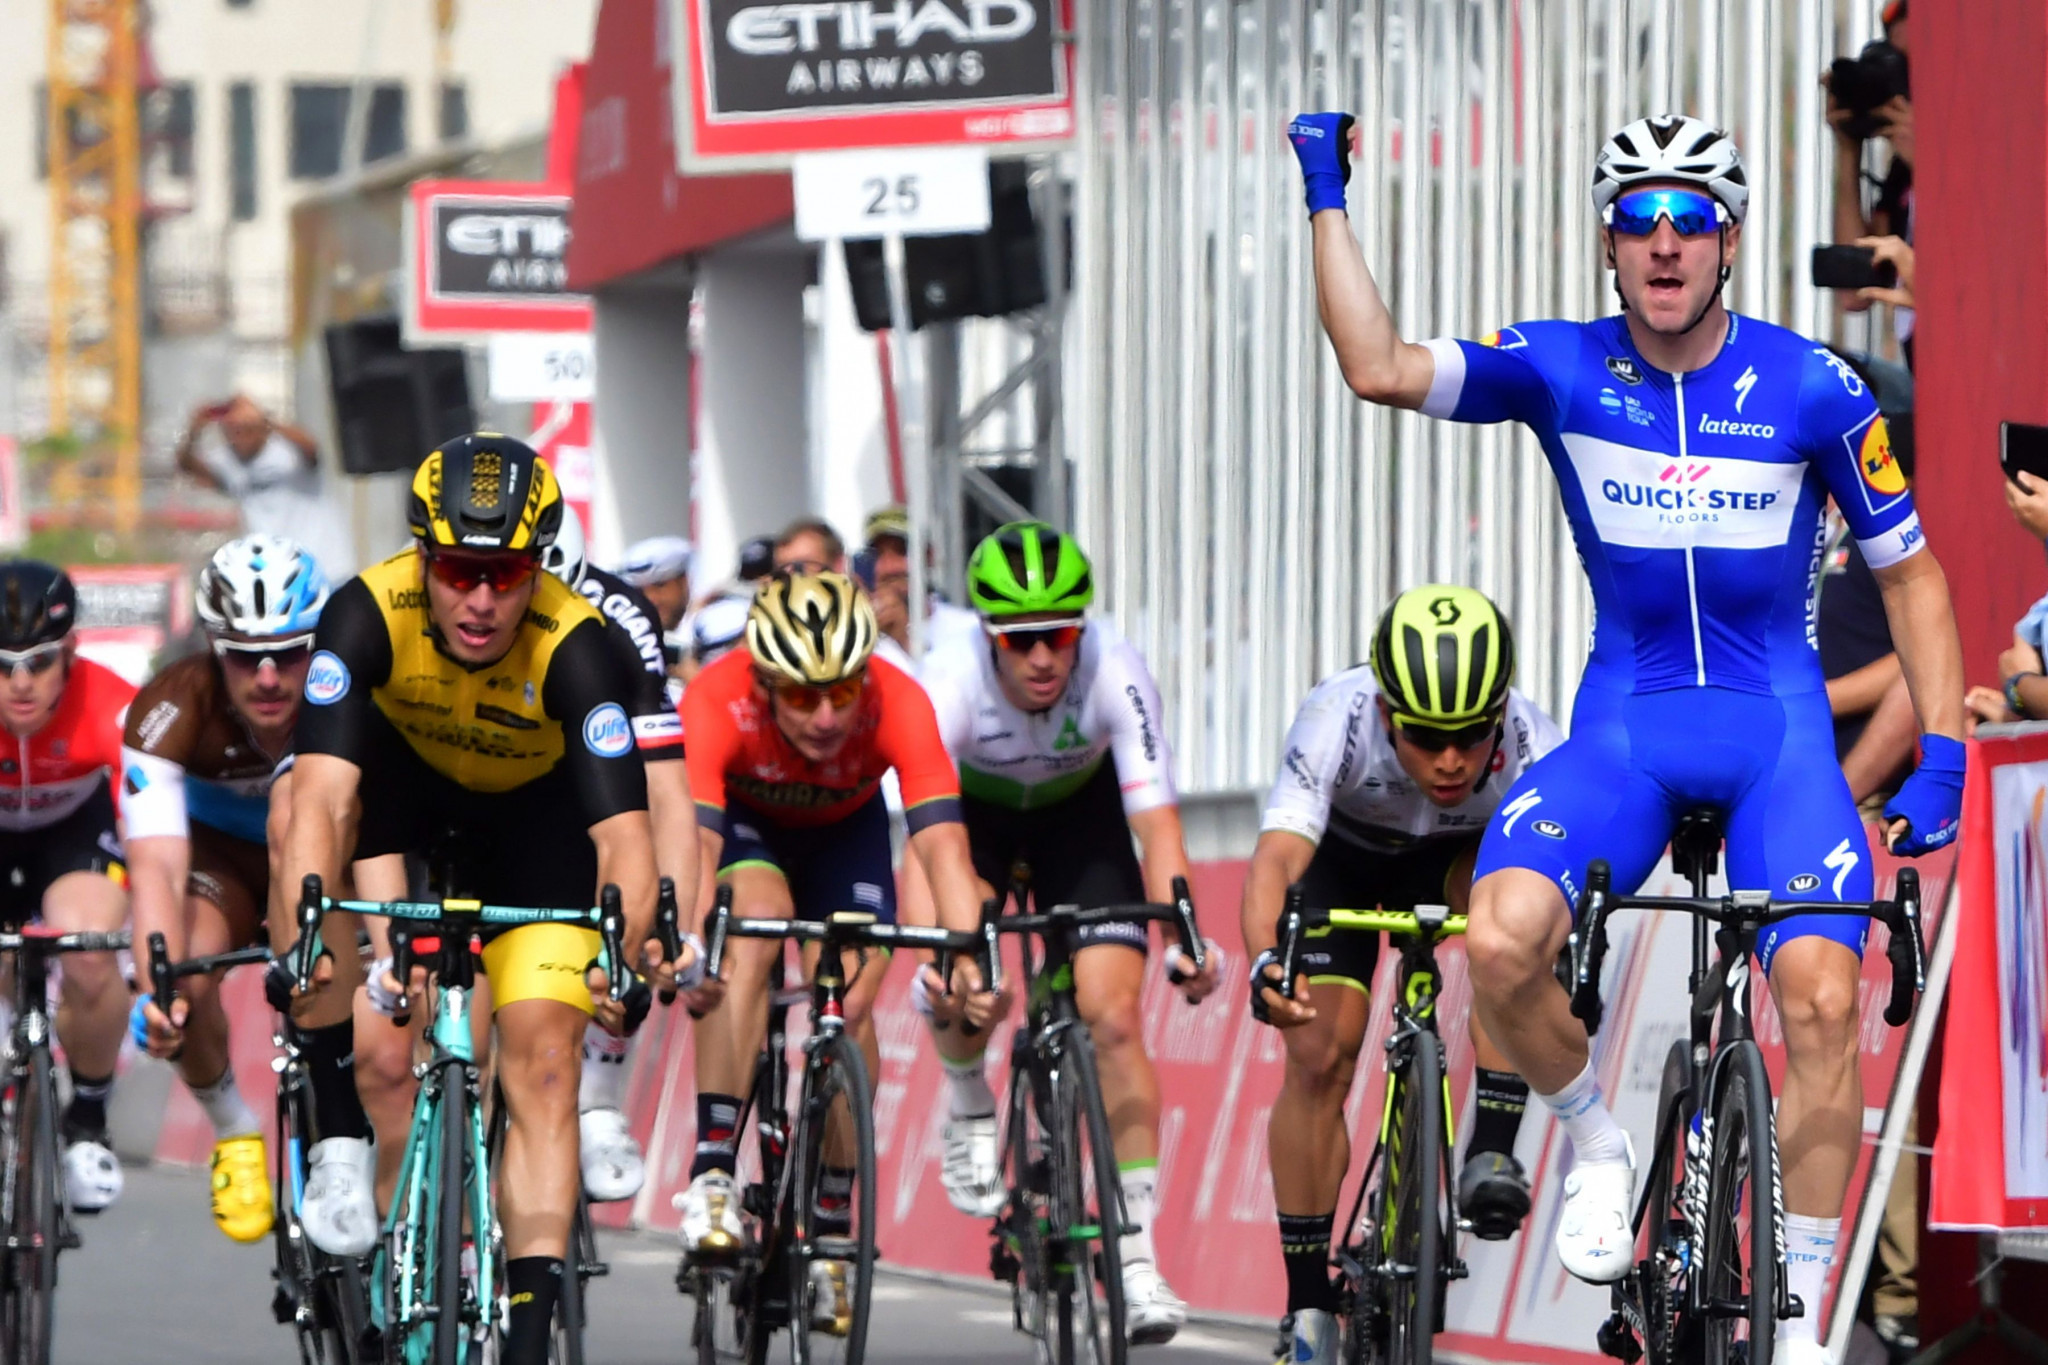 Viviani assumes race lead after winning second stage of Abu Dhabi Tour